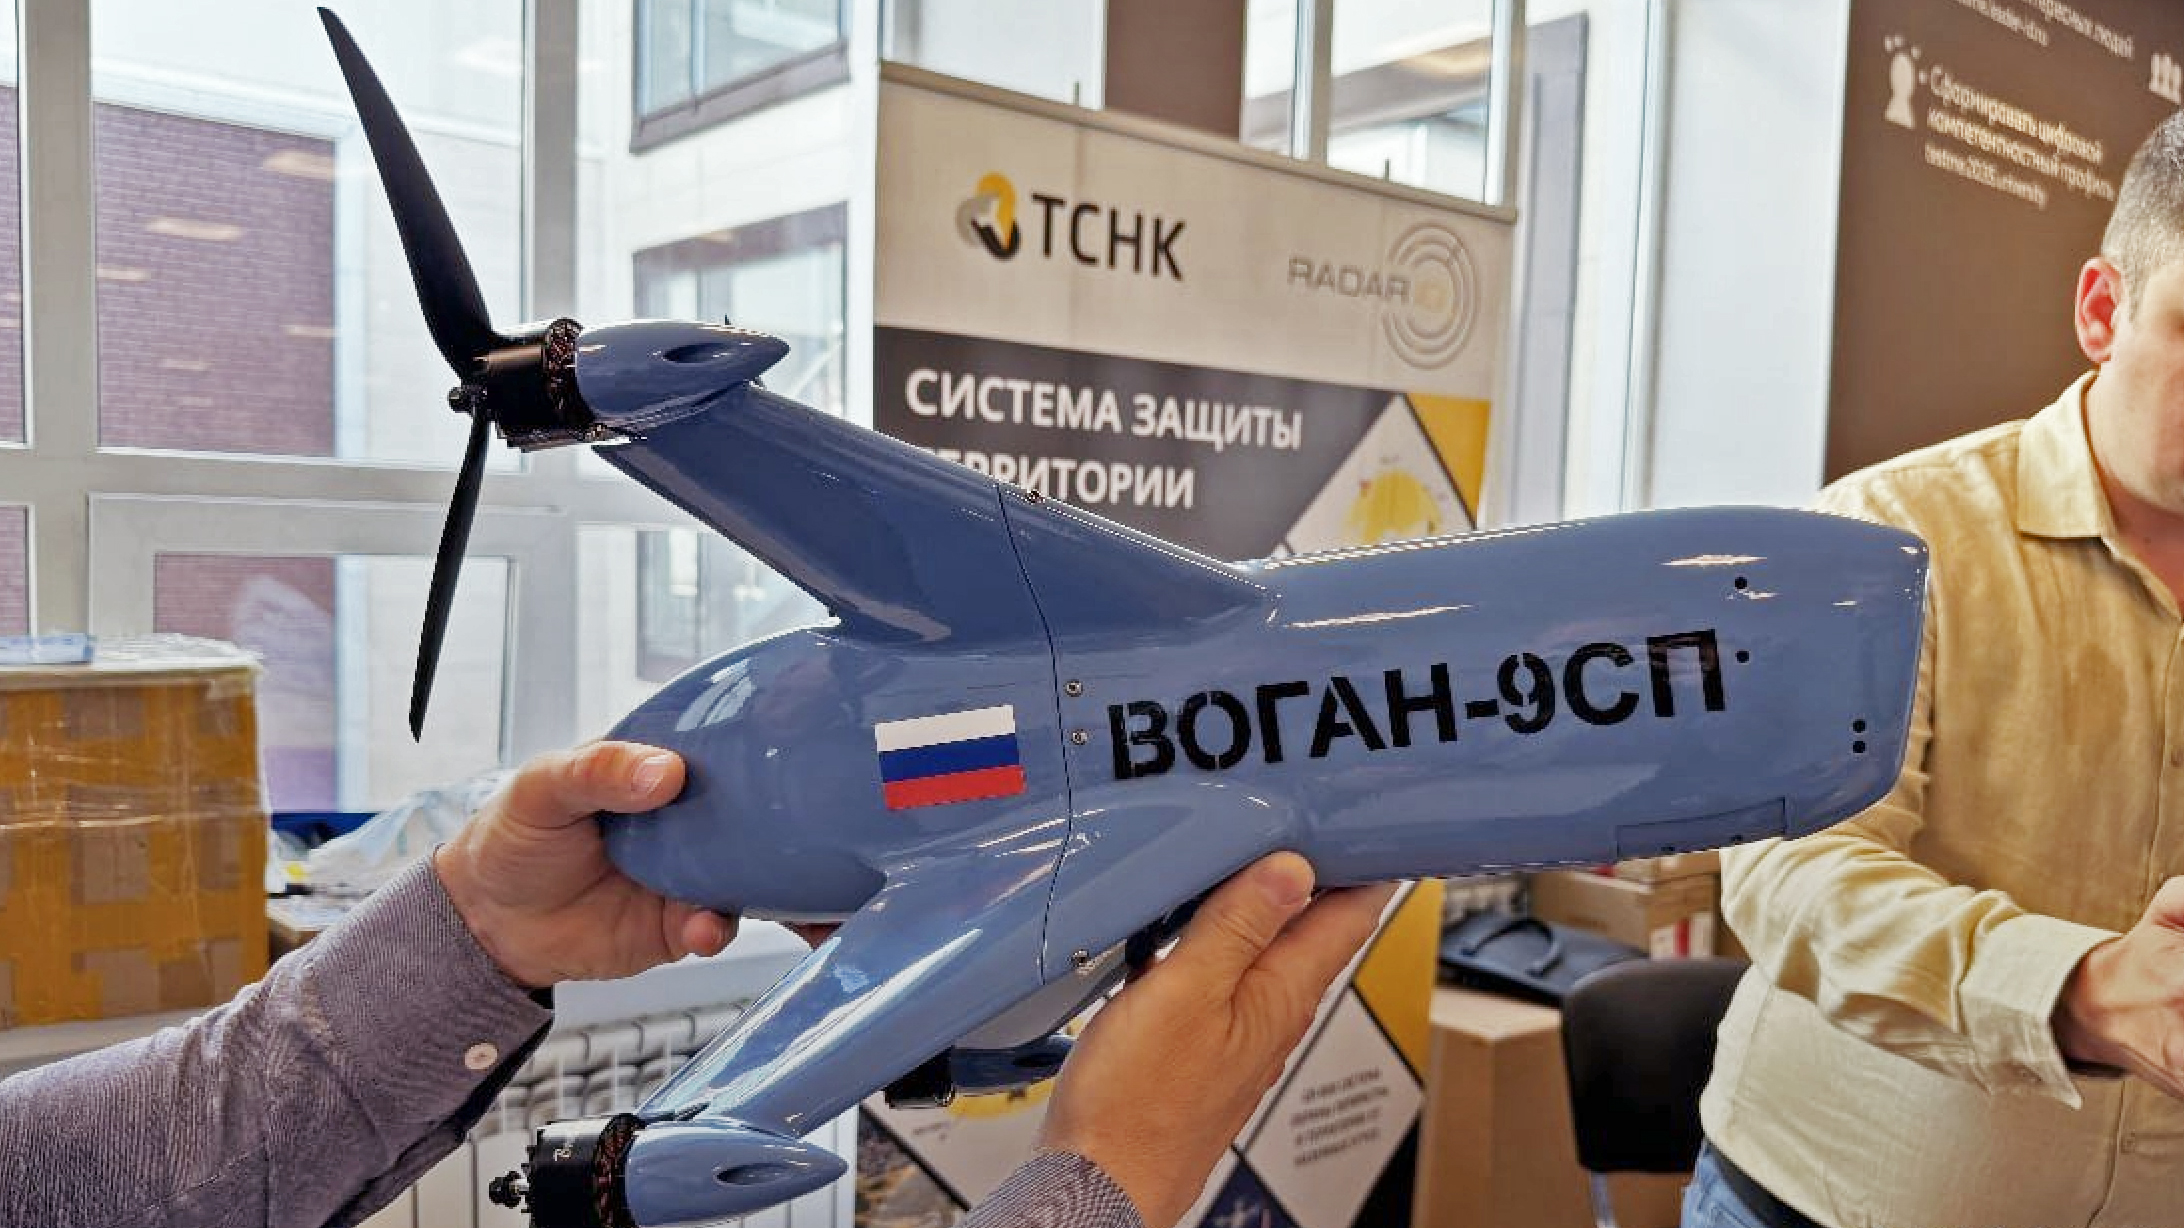 Russia has unveiled a counter-drone interceptor, a single-use drone with an explosive warhead that’s expressly designed to bring down the kinds of Ukrainian uncrewed aerial vehicles that have taken a steady toll of Russian troops and equipment on the battlefield. The Vogan-9SP counter-drone interceptor was developed by Russia’s Red Line company, seemingly a new entrant in the field.